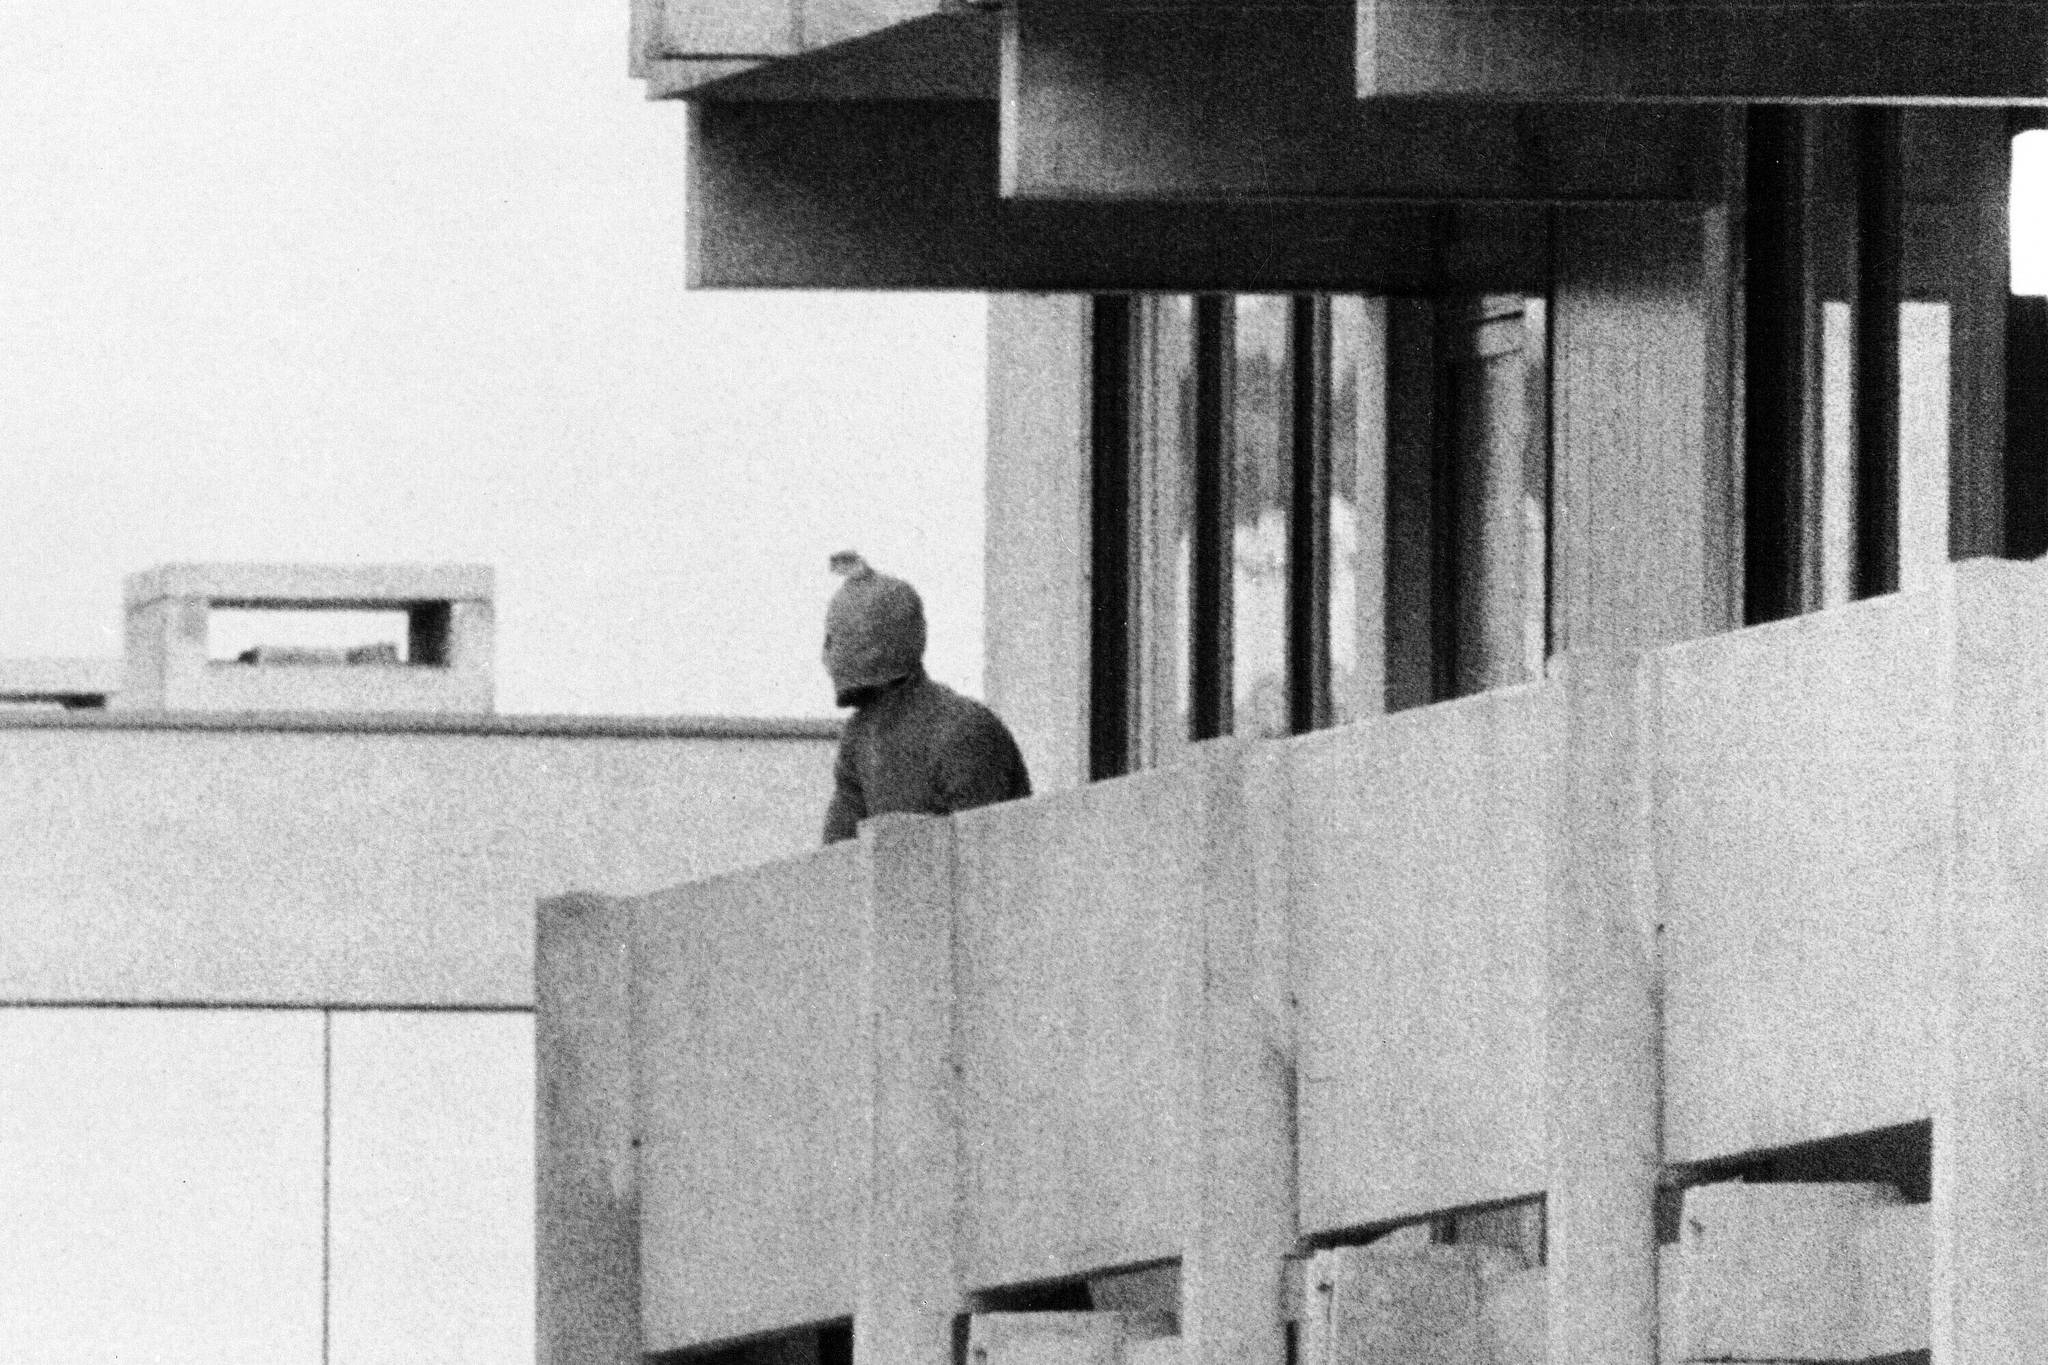 On Sept. 5, 1972, a Palestinian commando group seizes the Israeli Olympic team quarters at the Olympic Village in Munich, Germany. A member of the commando group is seen here as he appears with a hood over his face on the balcony of the building, where they hold several Israeli athletes hostage. (AP Photo / Kur Stumpf)